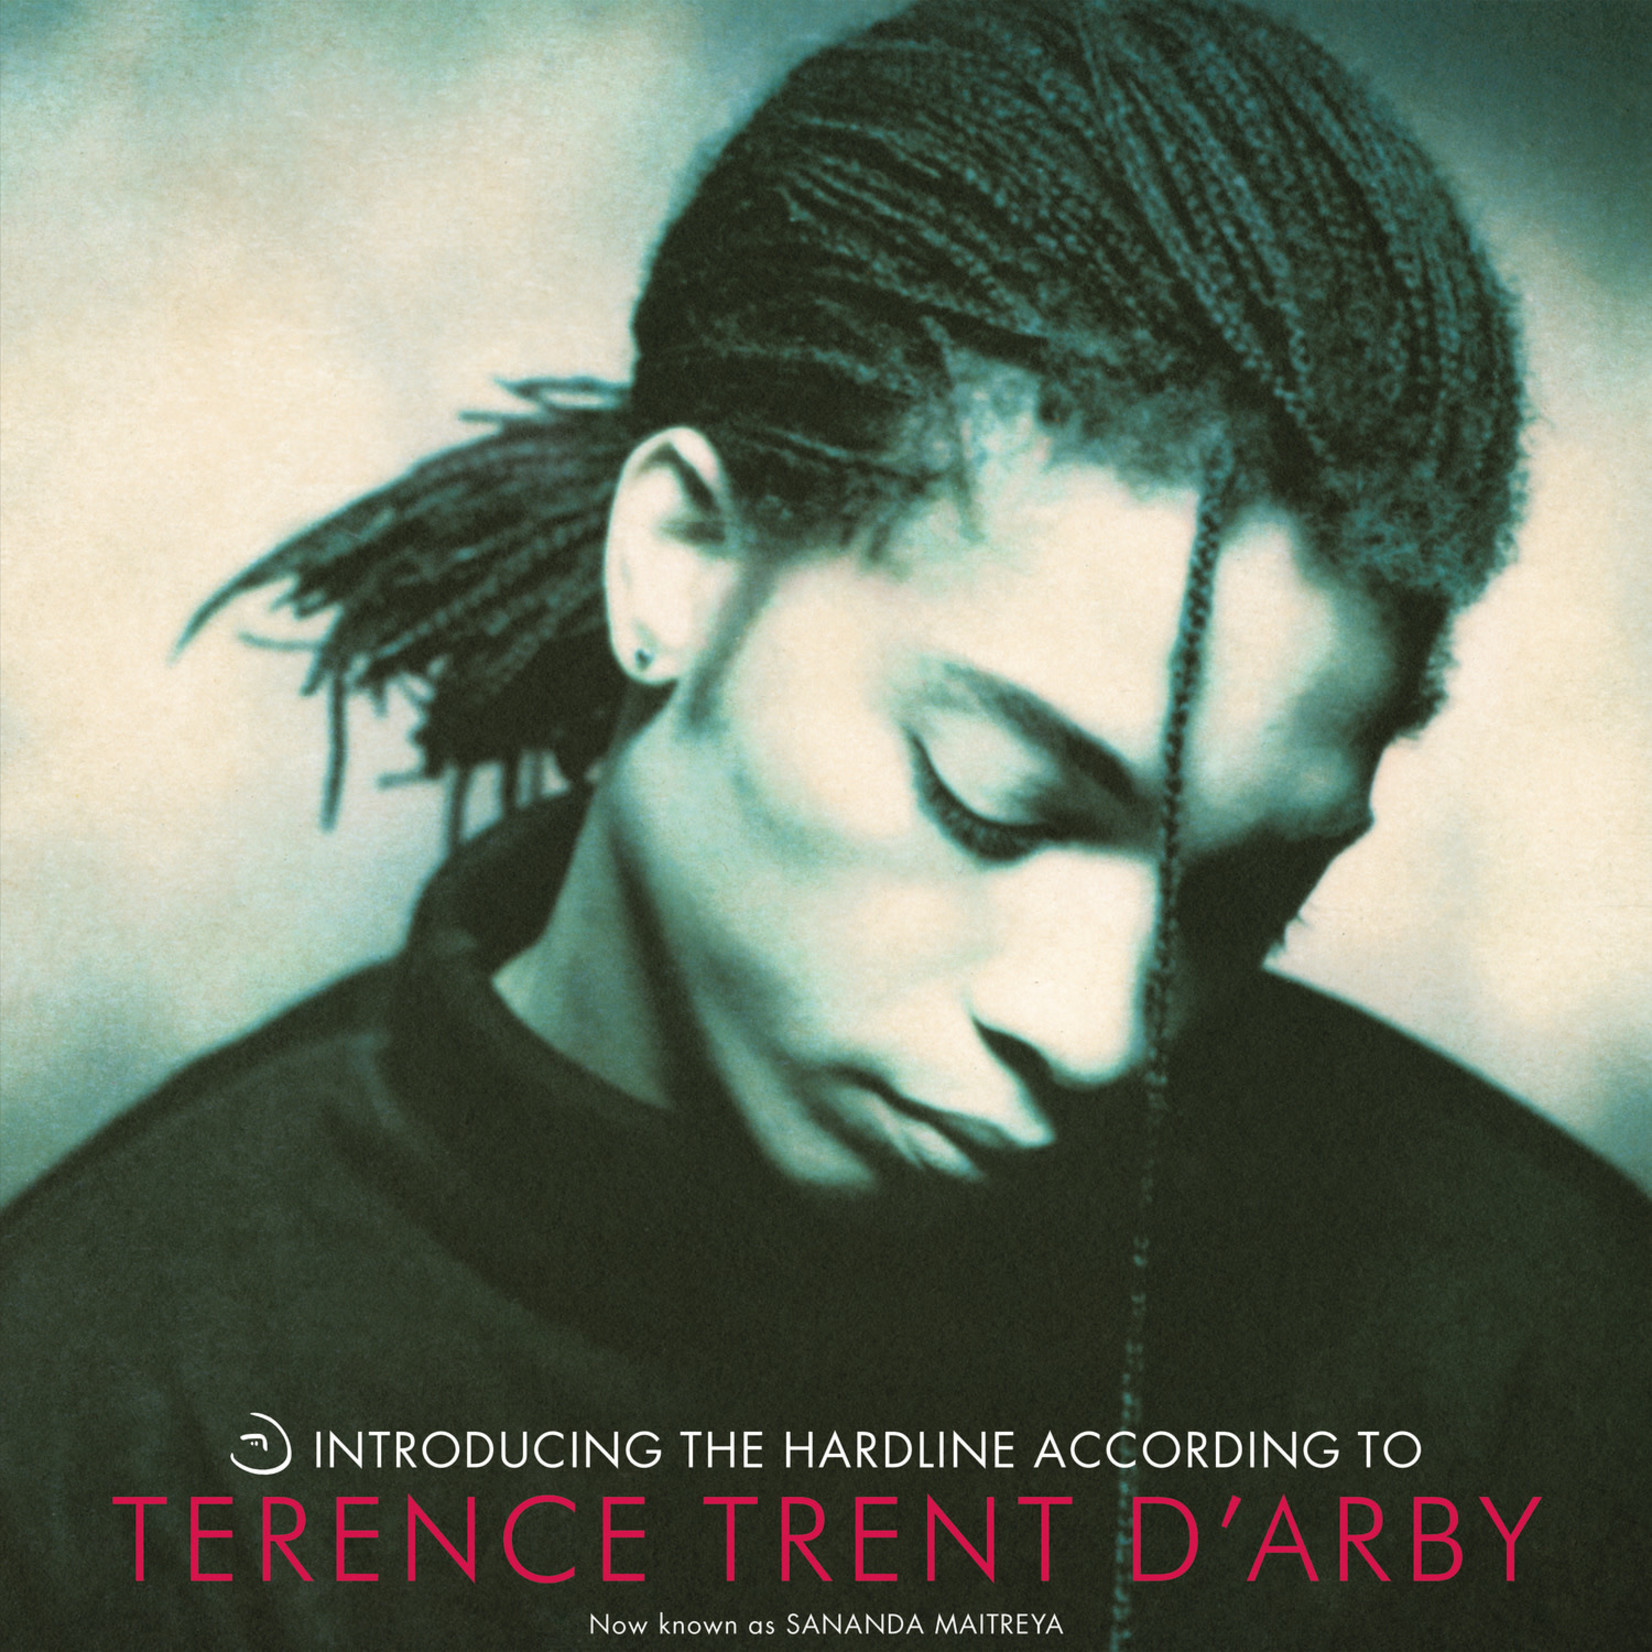 Terence Trent D'Arby - Introducing The Hardline According To Terence Trent D'Arby [USED CD]